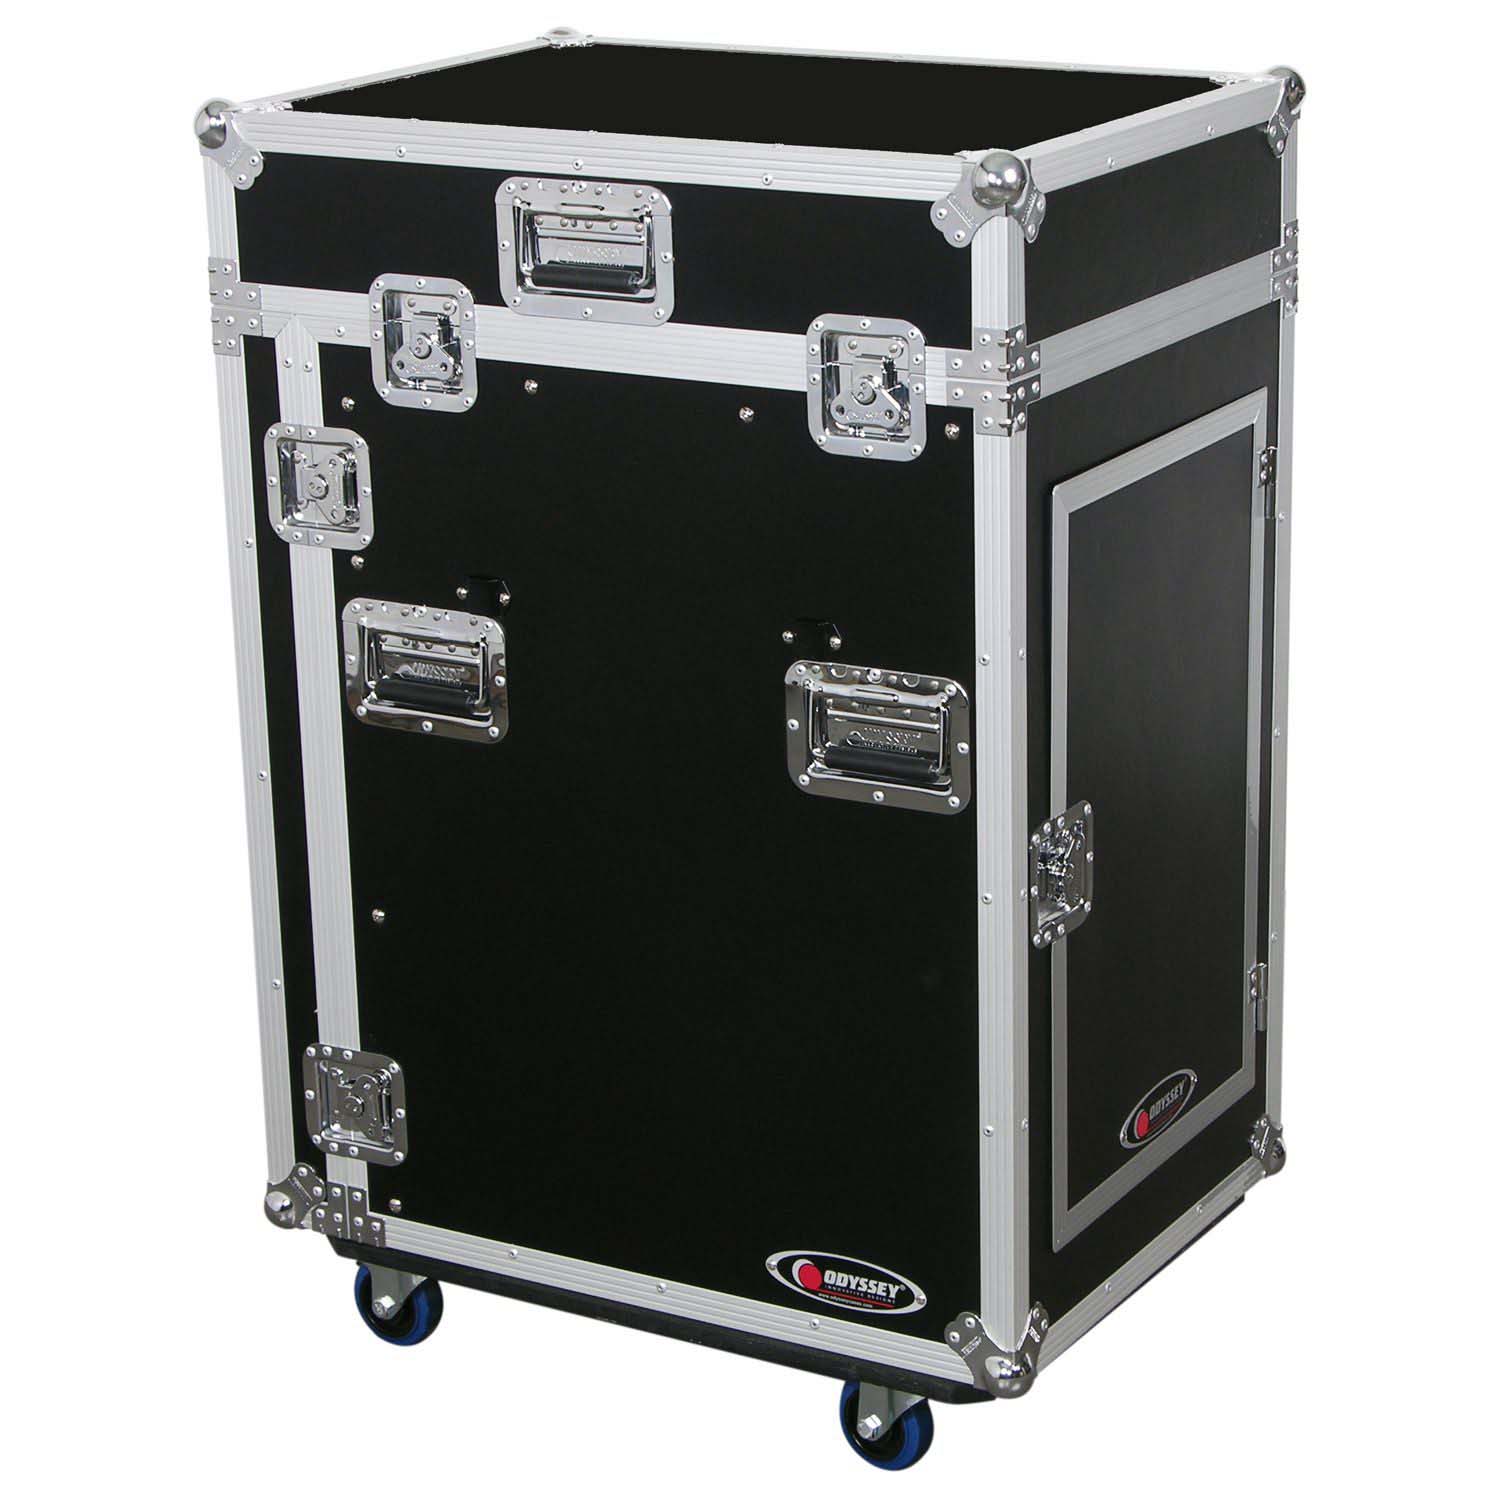 Odyssey FZ1316WDLX Deluxe 13U Top Slanted 16U Bottom Vertical Pro Combo Rack with Side Table and Casters - Hollywood DJ